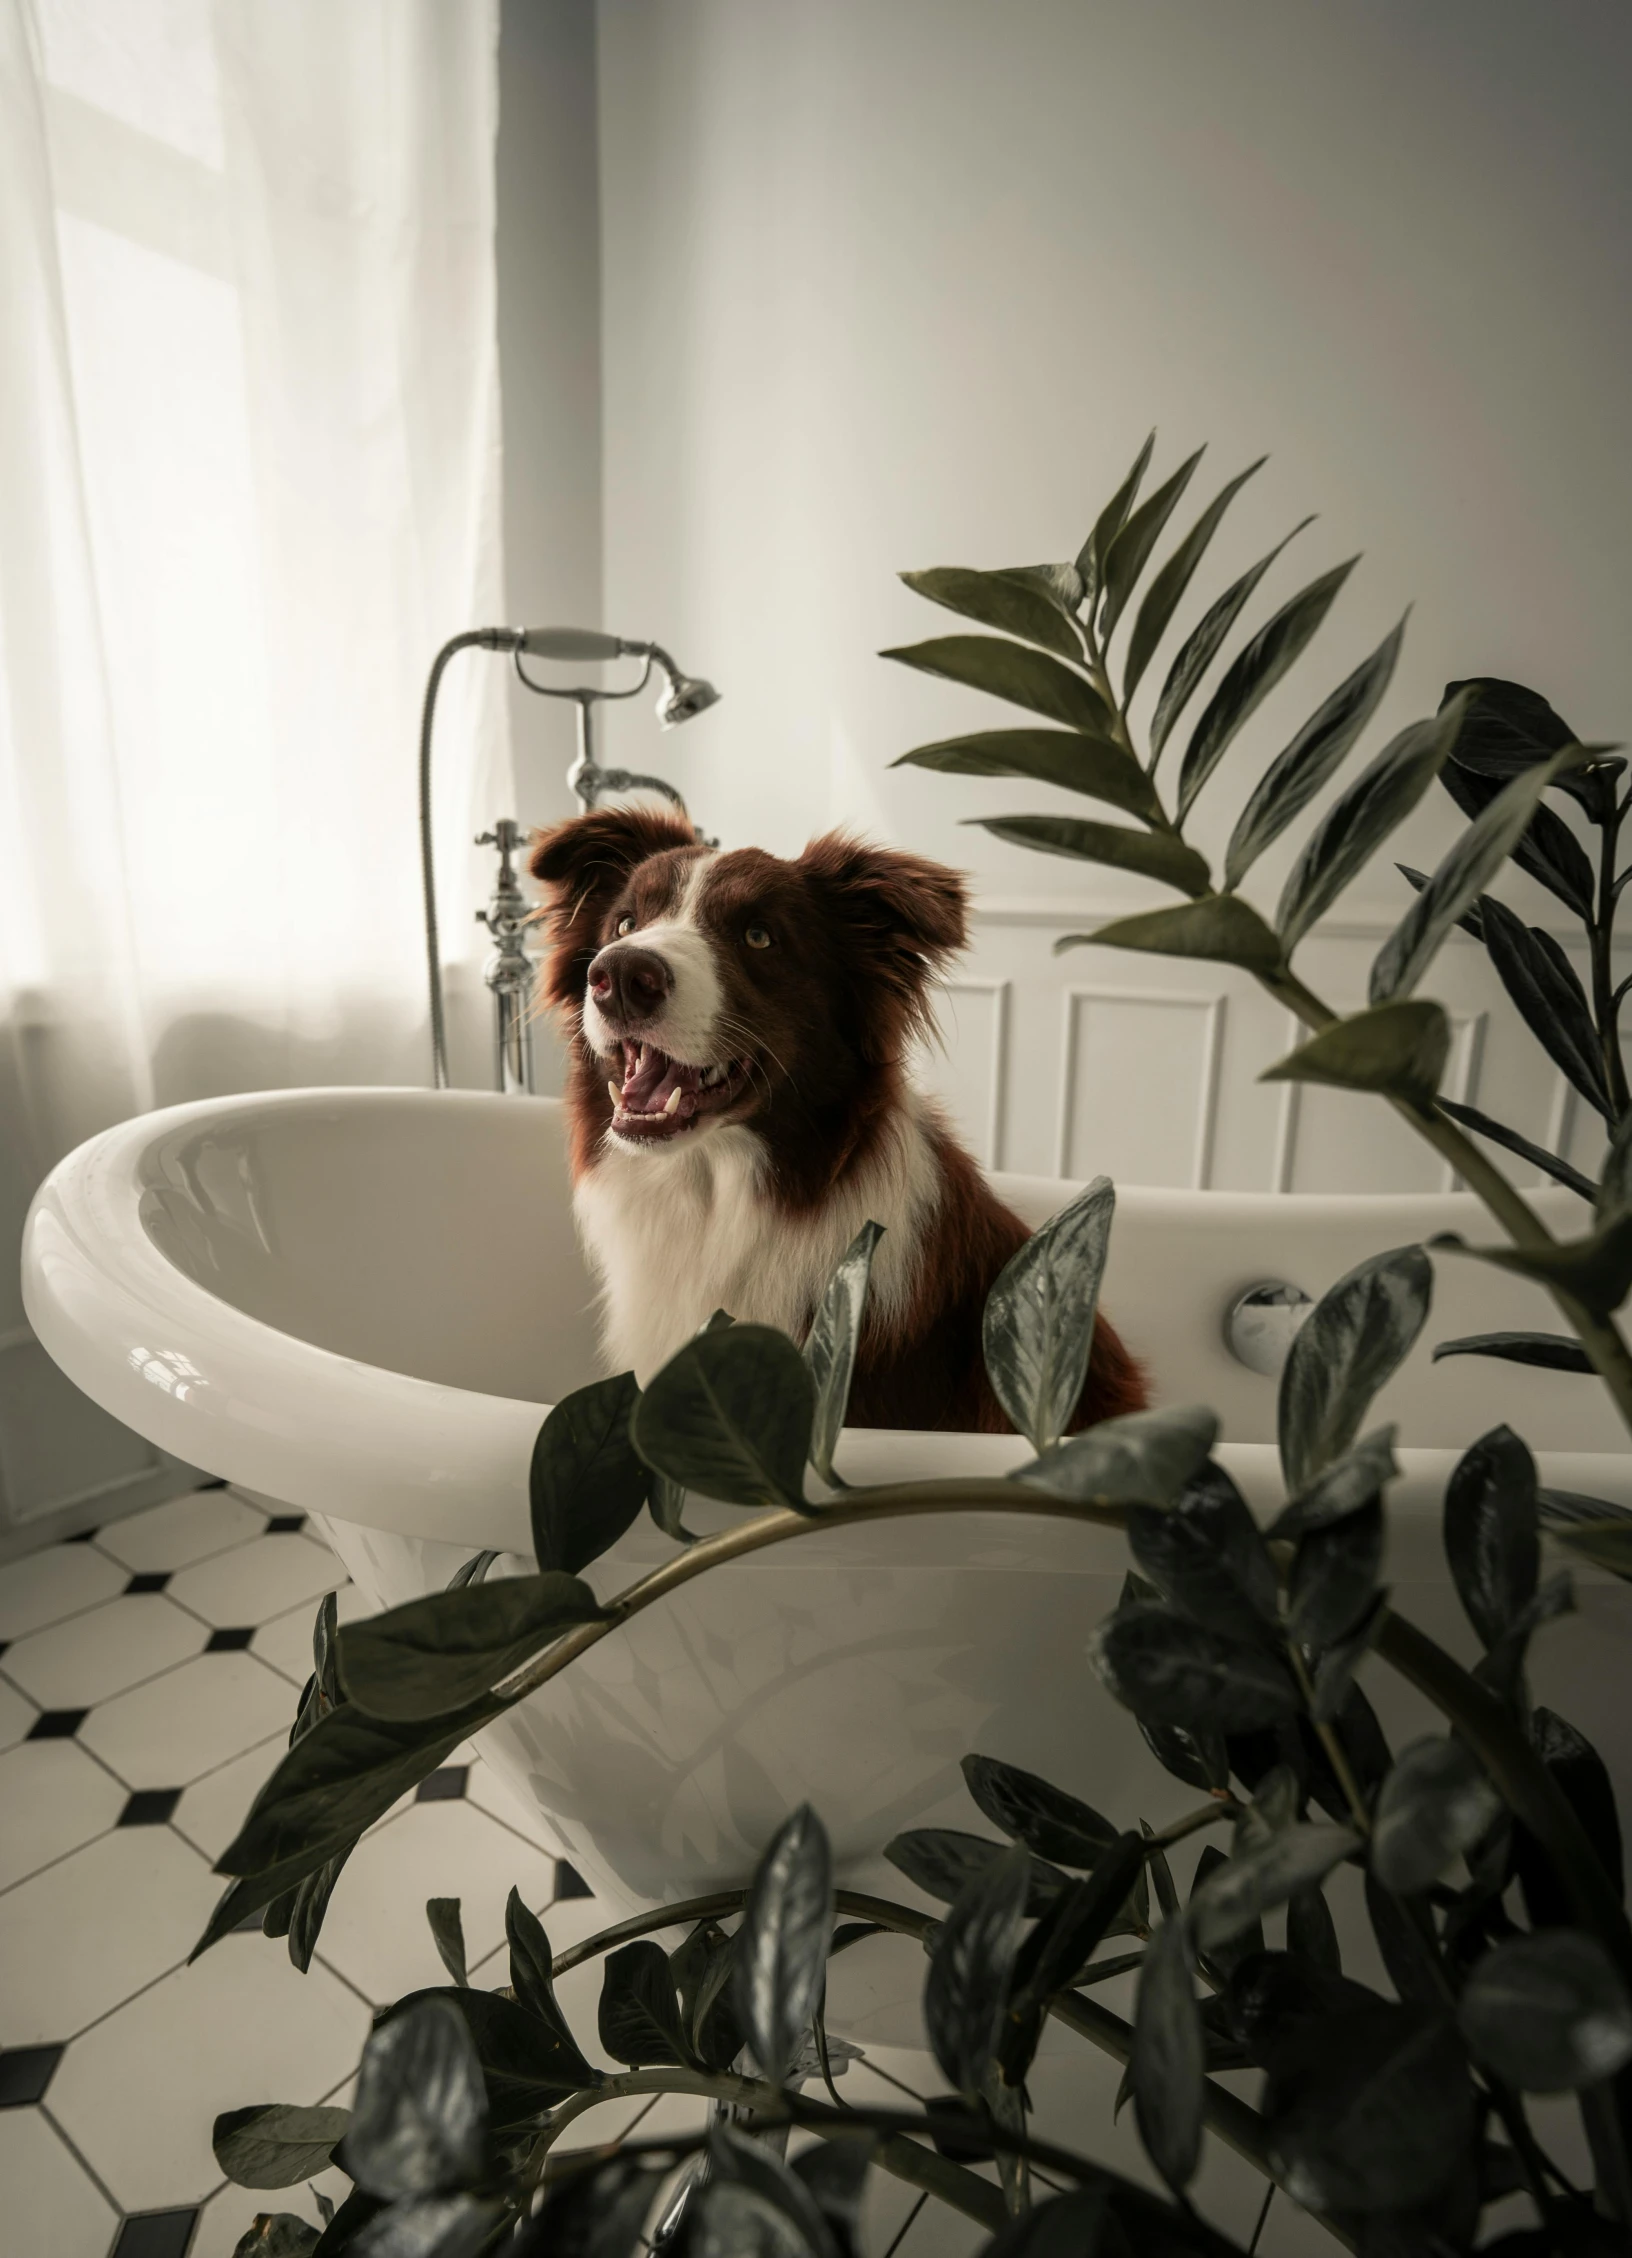 a dog sits in the bathtub, next to some plants